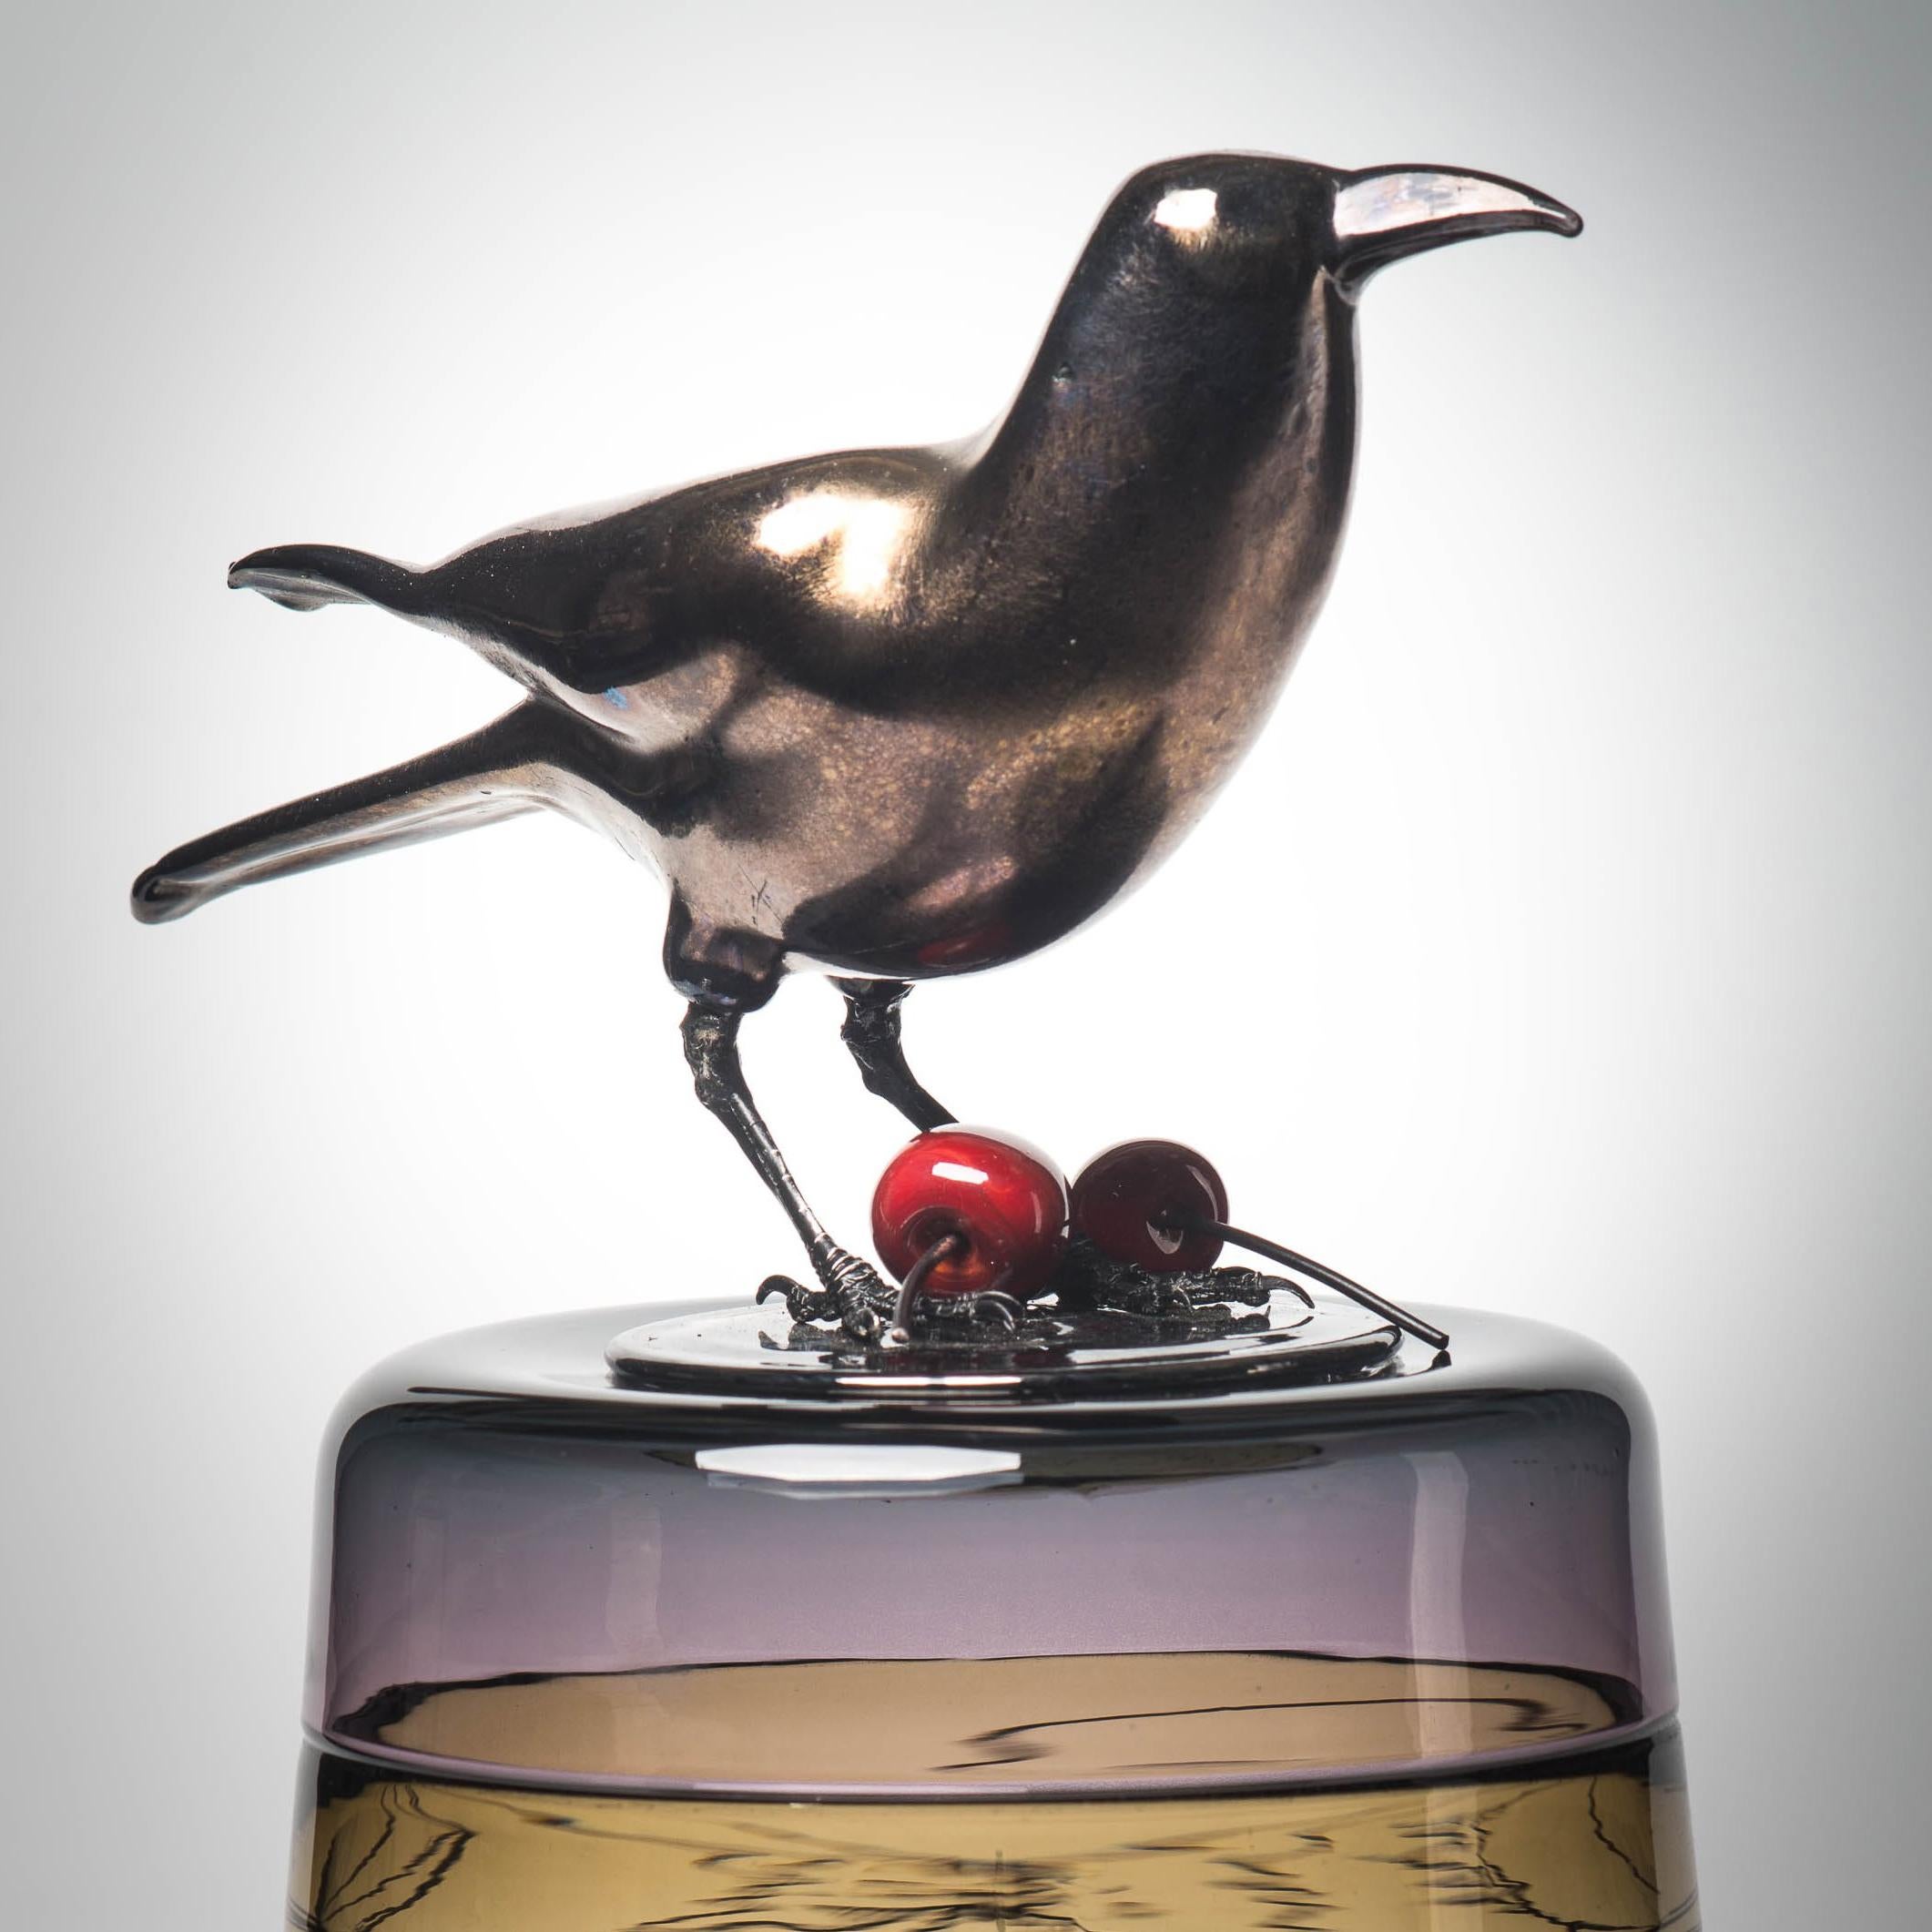 Hand-Crafted Red Cherries, a Unique Glass Sculptural Vase with Black Crow by Julie Johnson